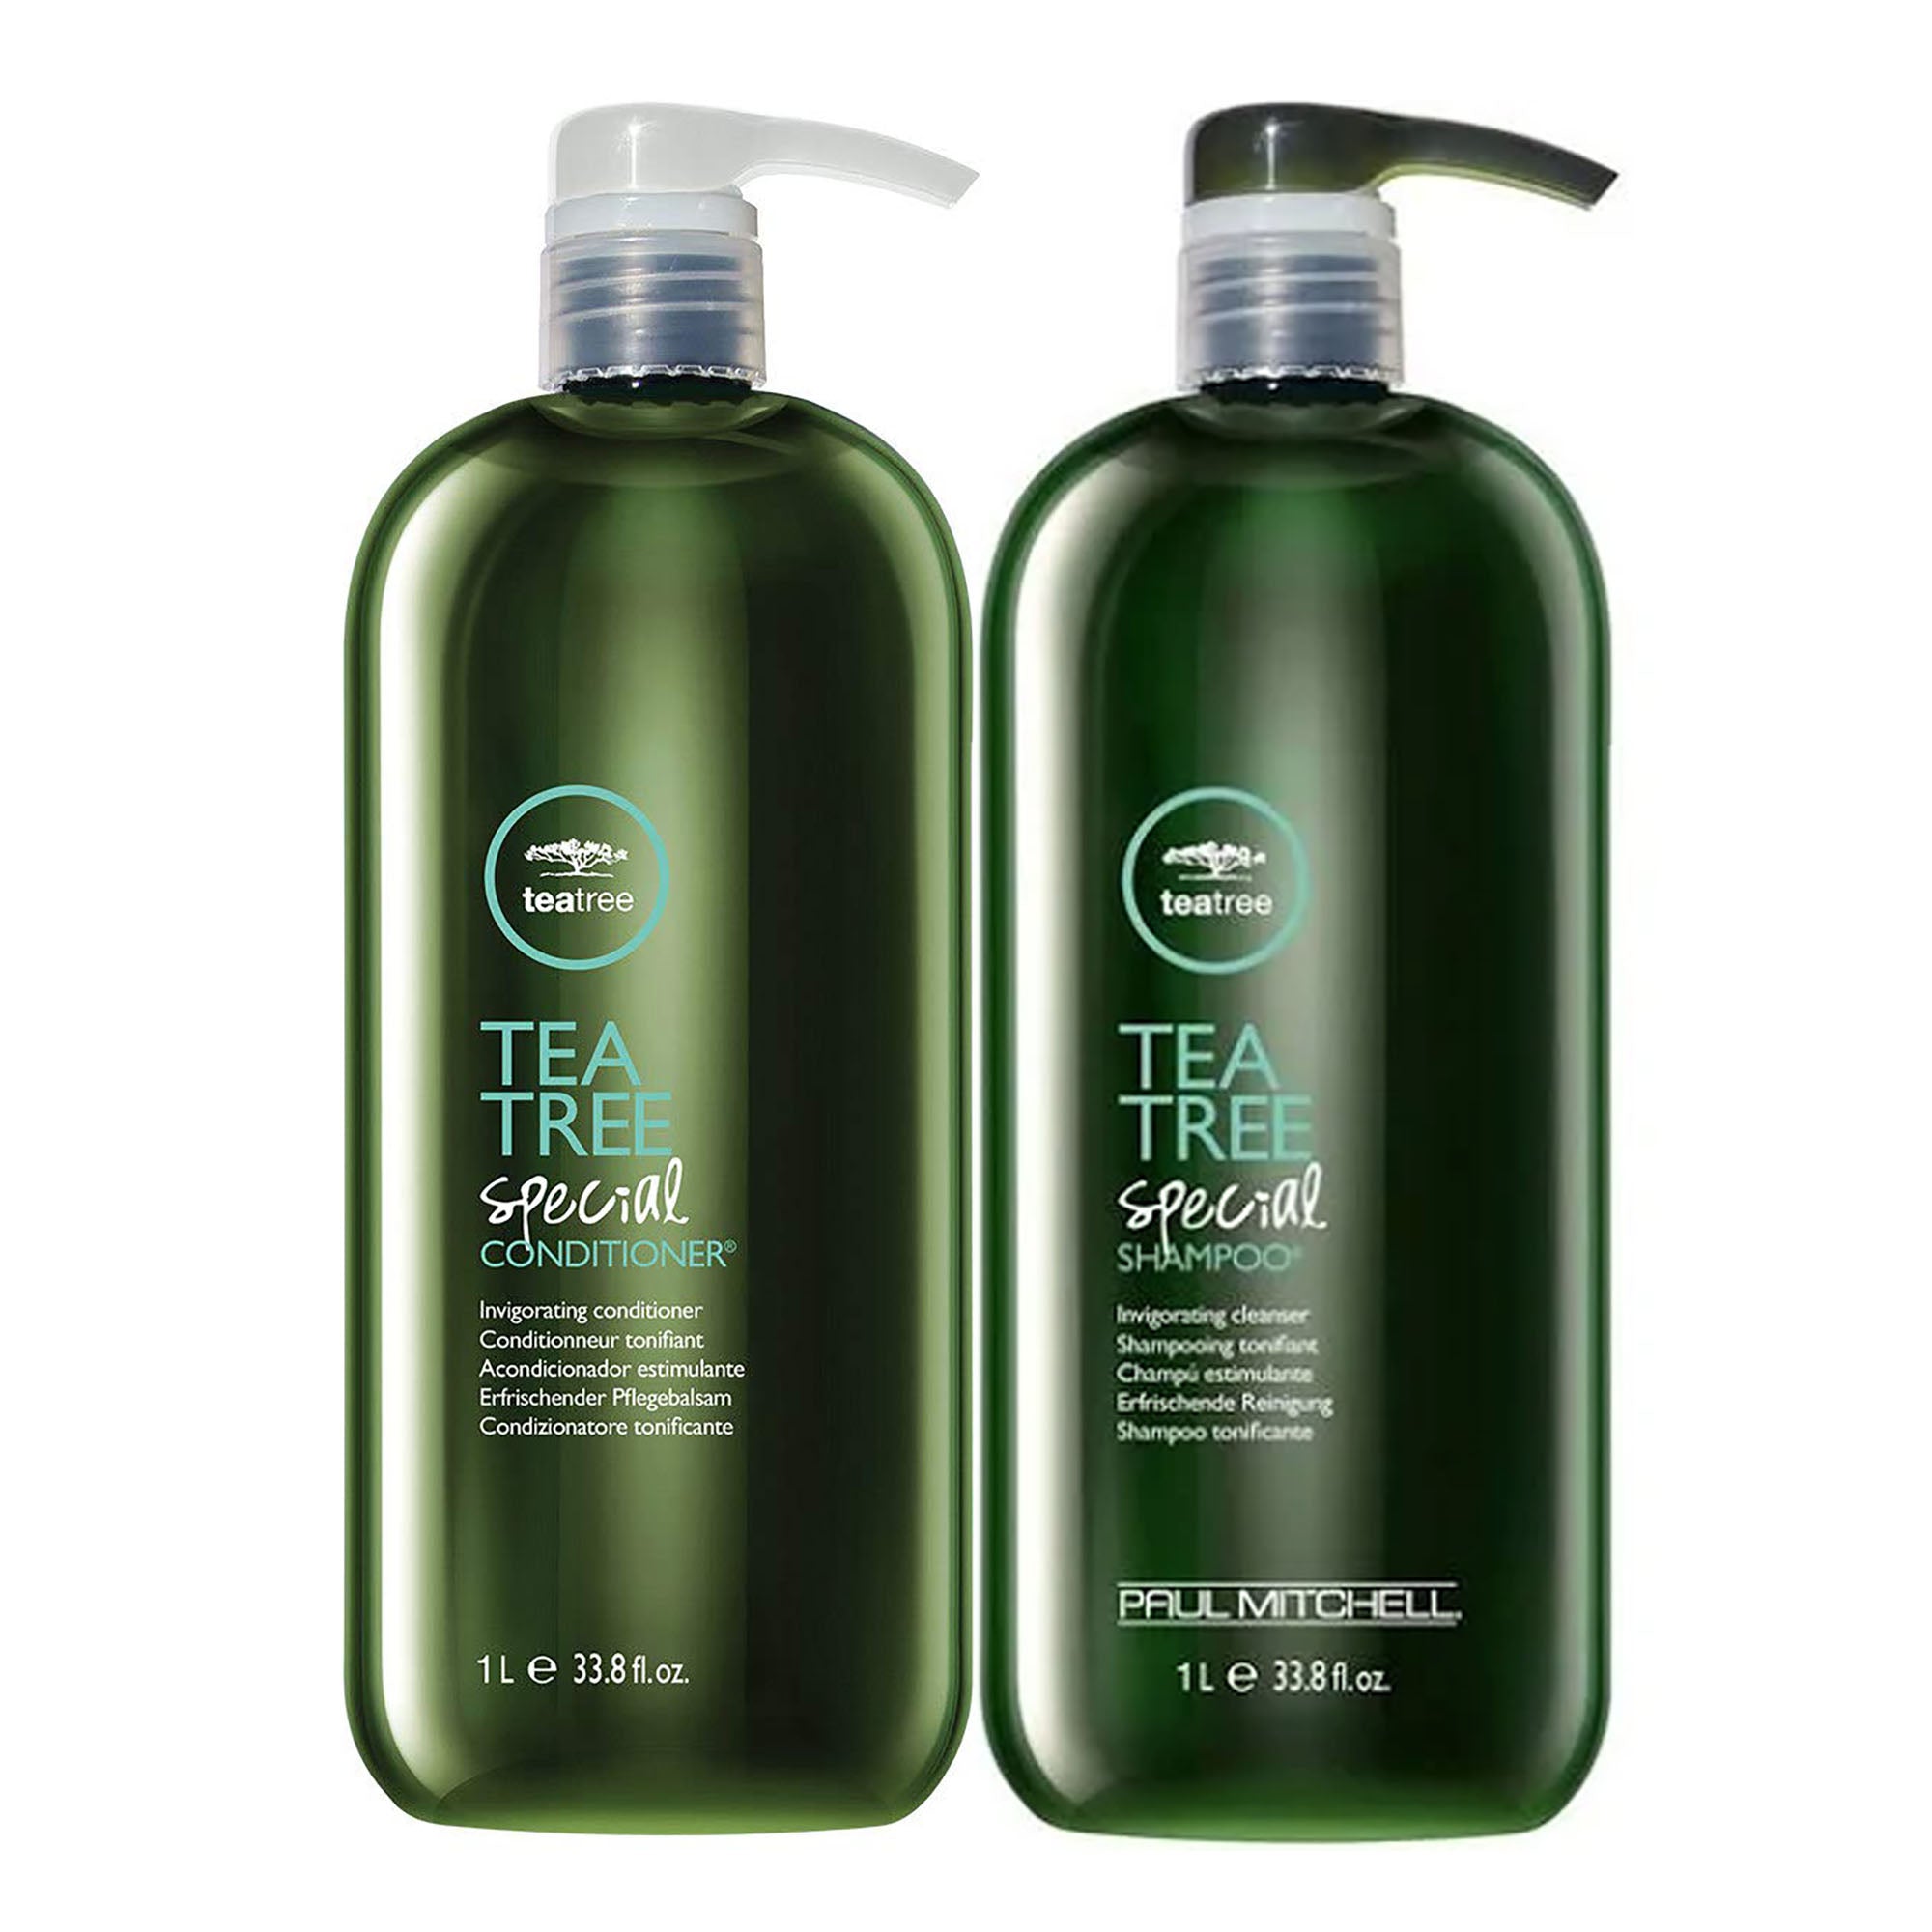 Paul Mitchell Tea Tree - Special Shampoo & Conditioner  Duo Liter (discounts don't apply to this item) ($86 Value) / LITER